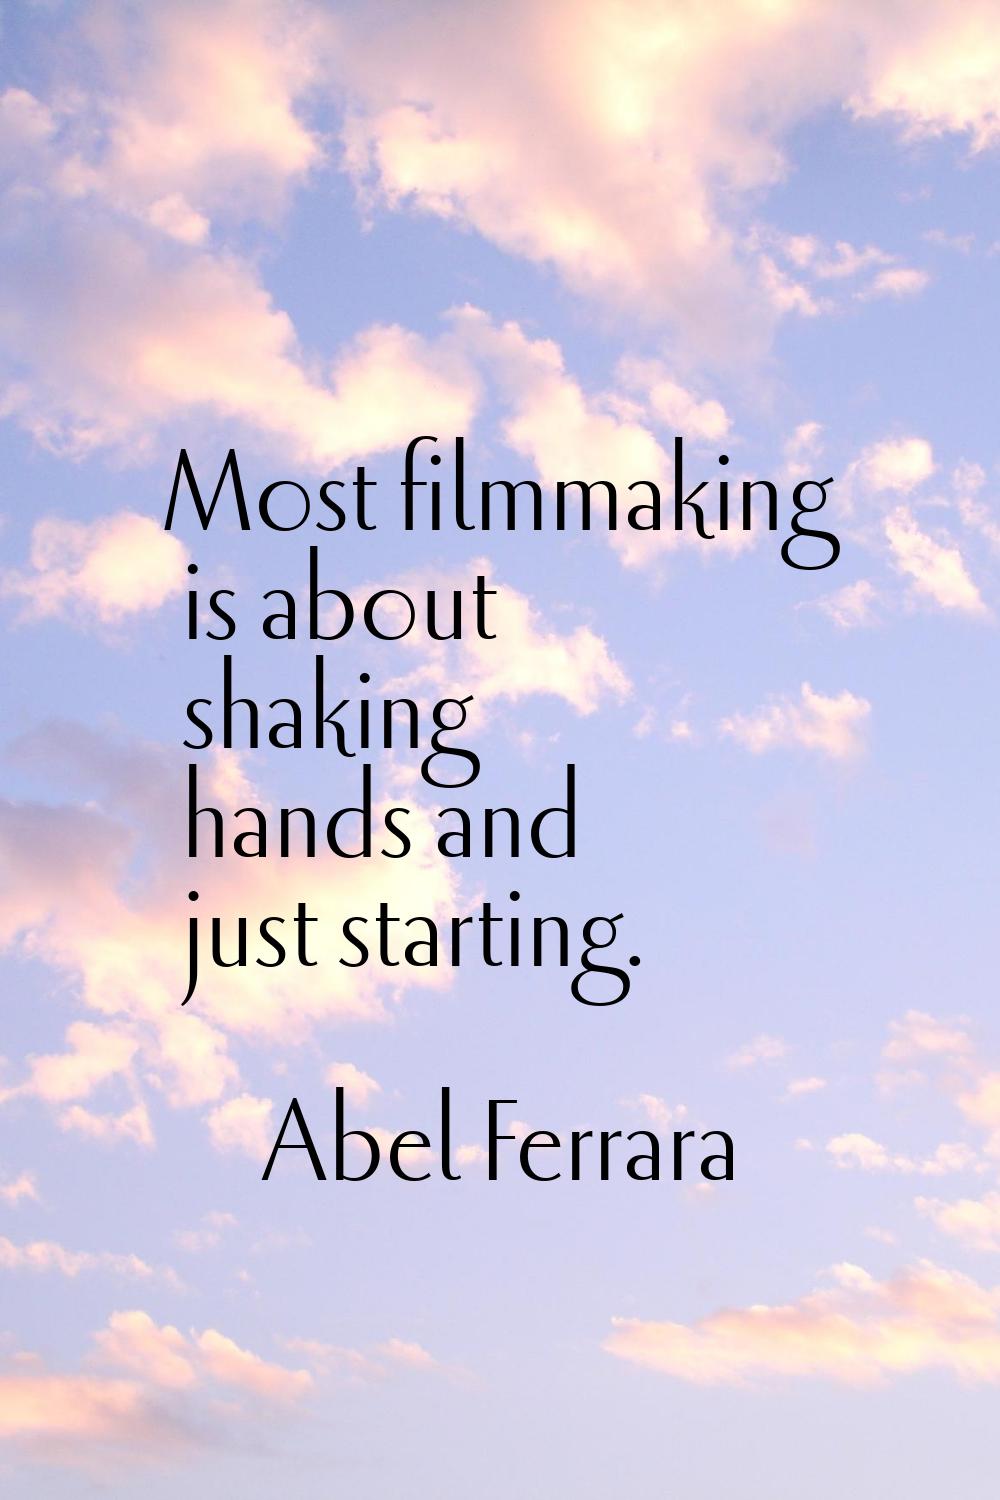 Most filmmaking is about shaking hands and just starting.